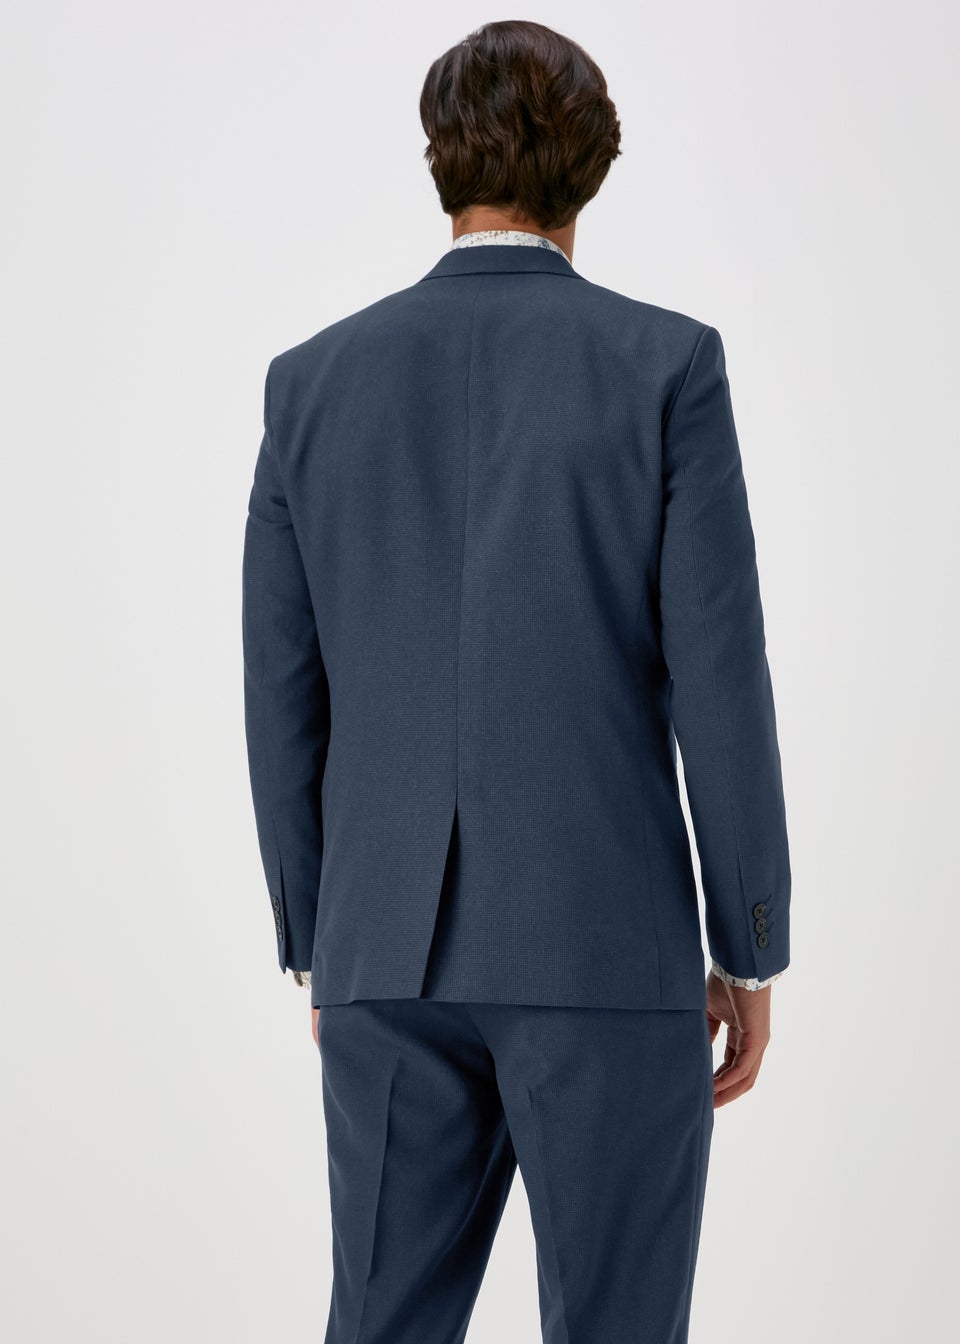 Taylor & Wright Navy Albarn Tailored Fit Jacket